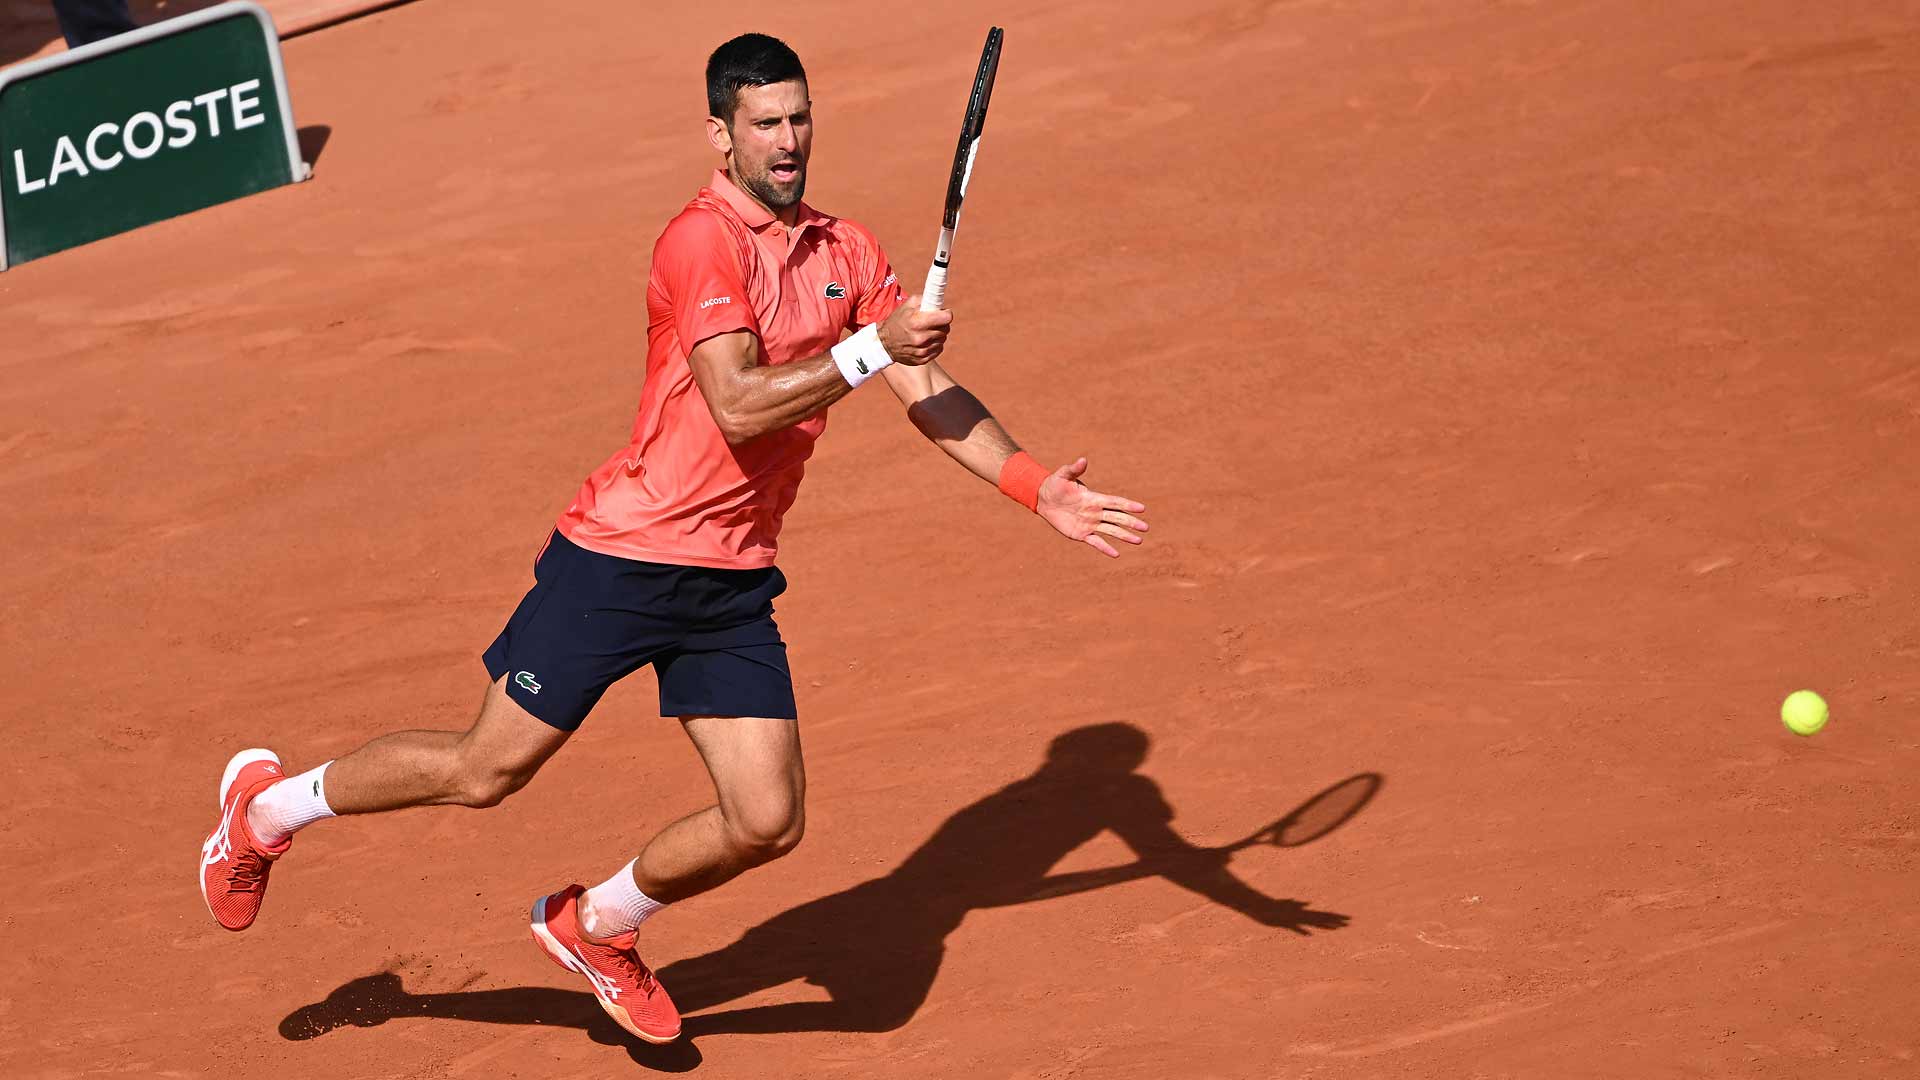 Novak Djokovic becomes the second-oldest finalist in tournament history (since 1925) with victory against Carlos Alcaraz on Friday at Roland Garros.